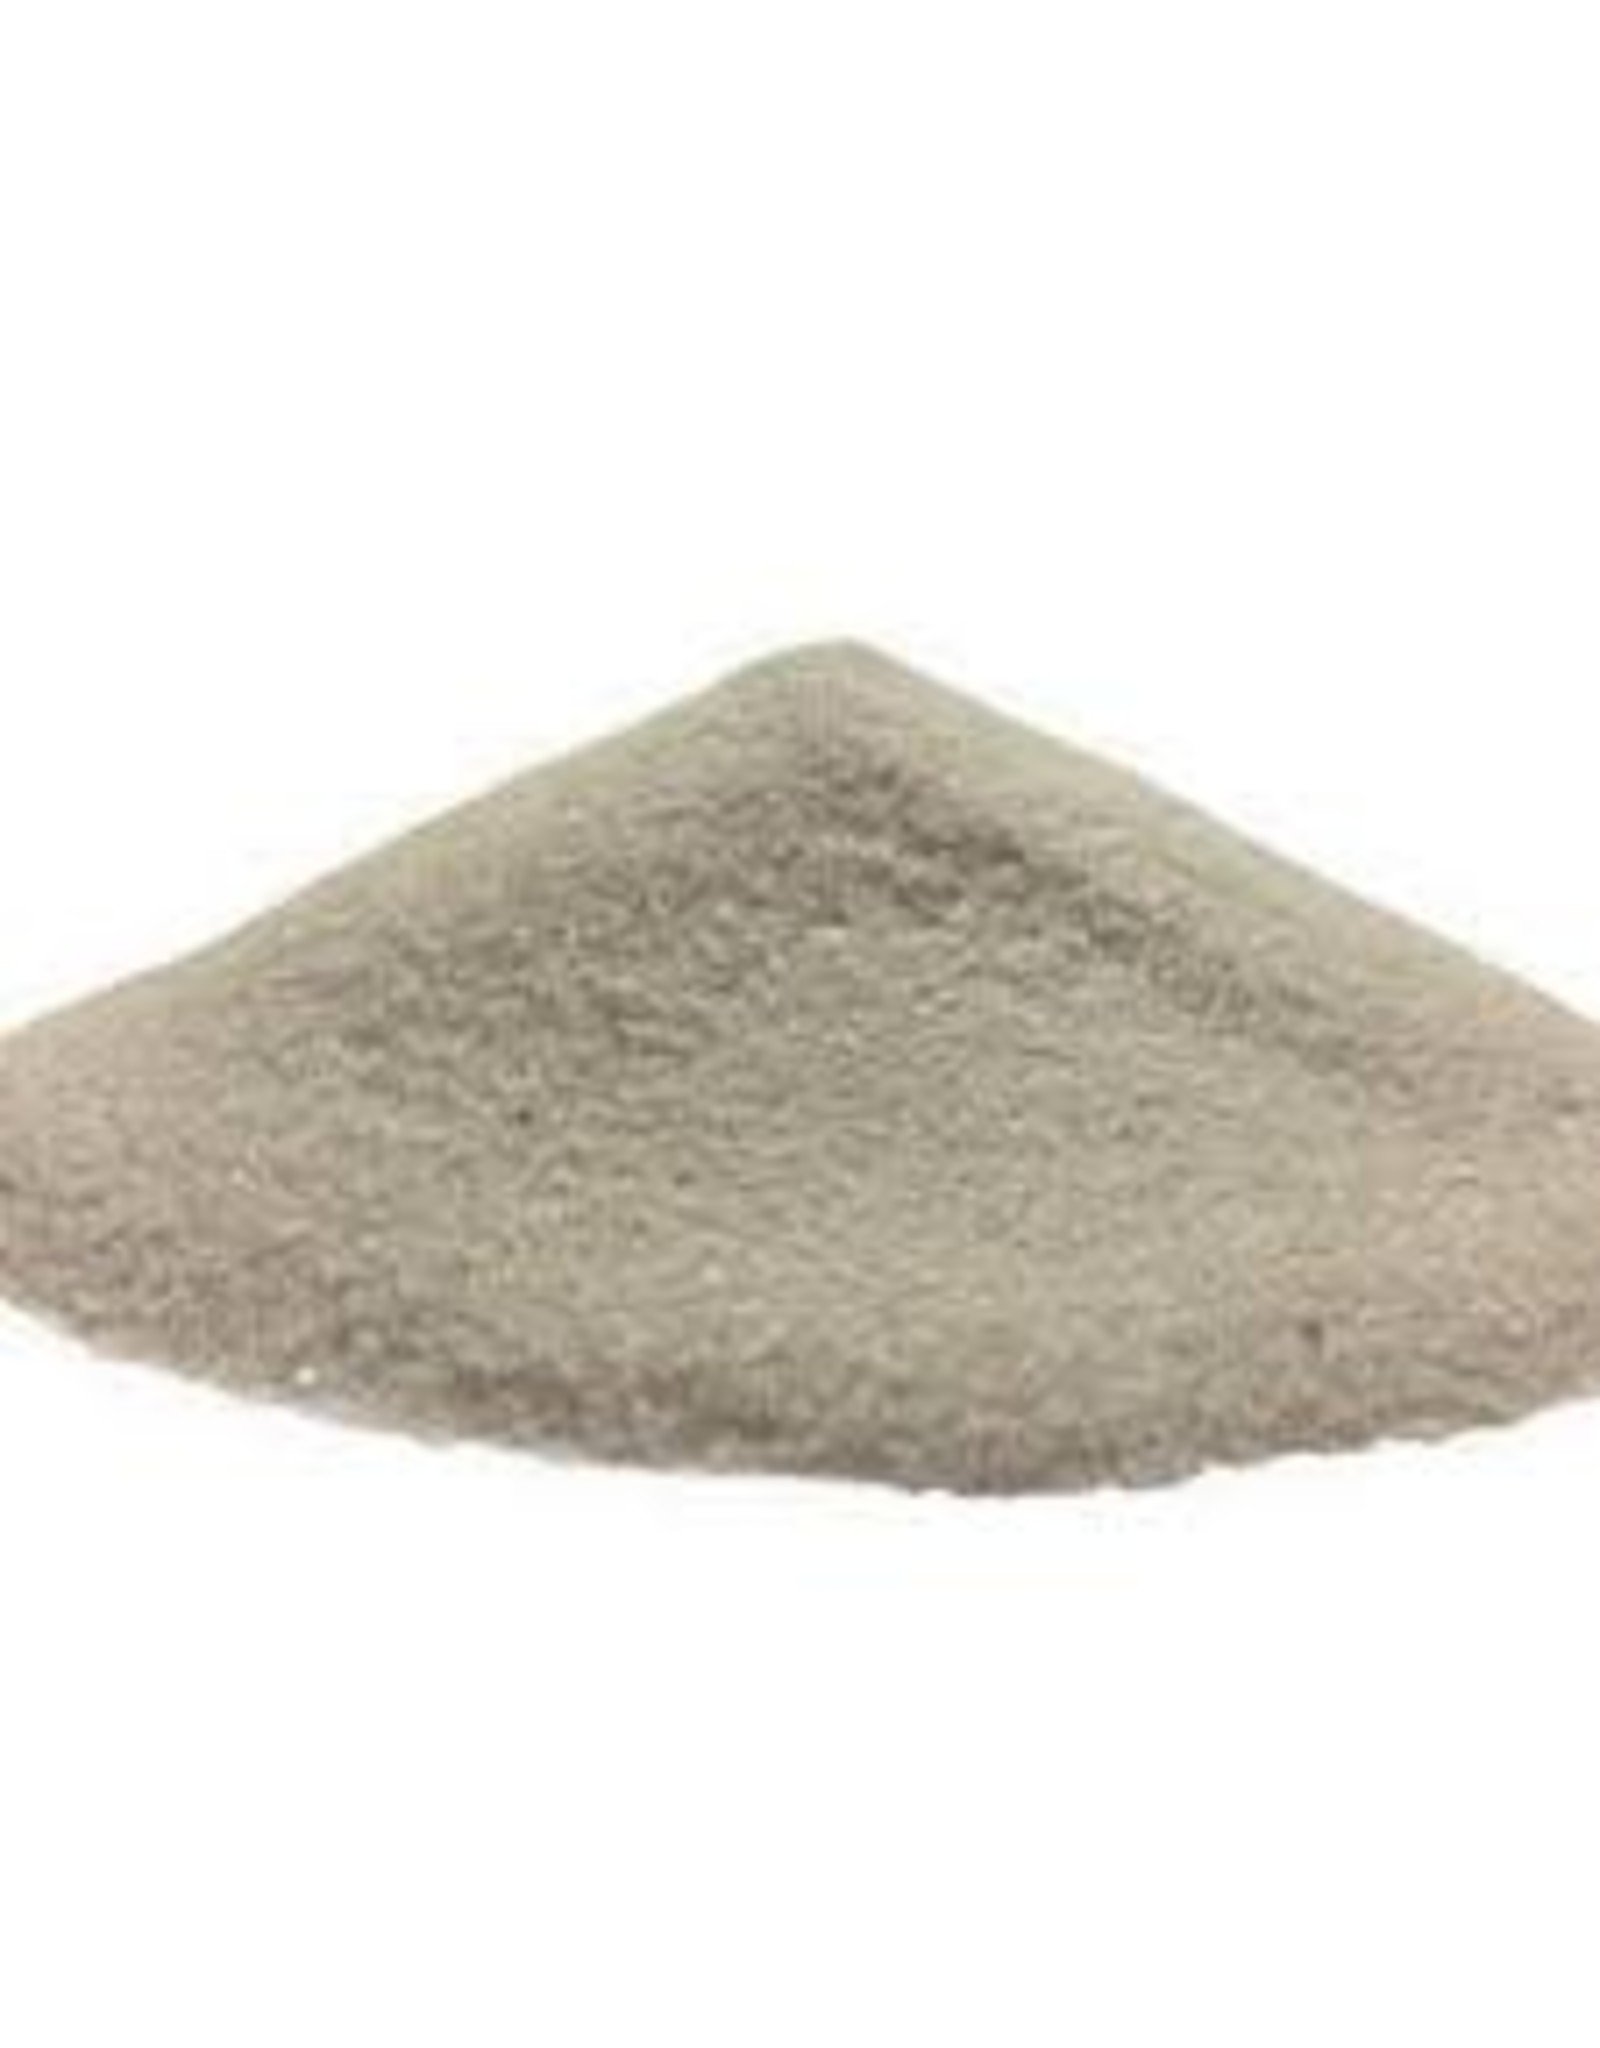 #2 SILICA GRIT - TARGET -10356762 (C-CAN)